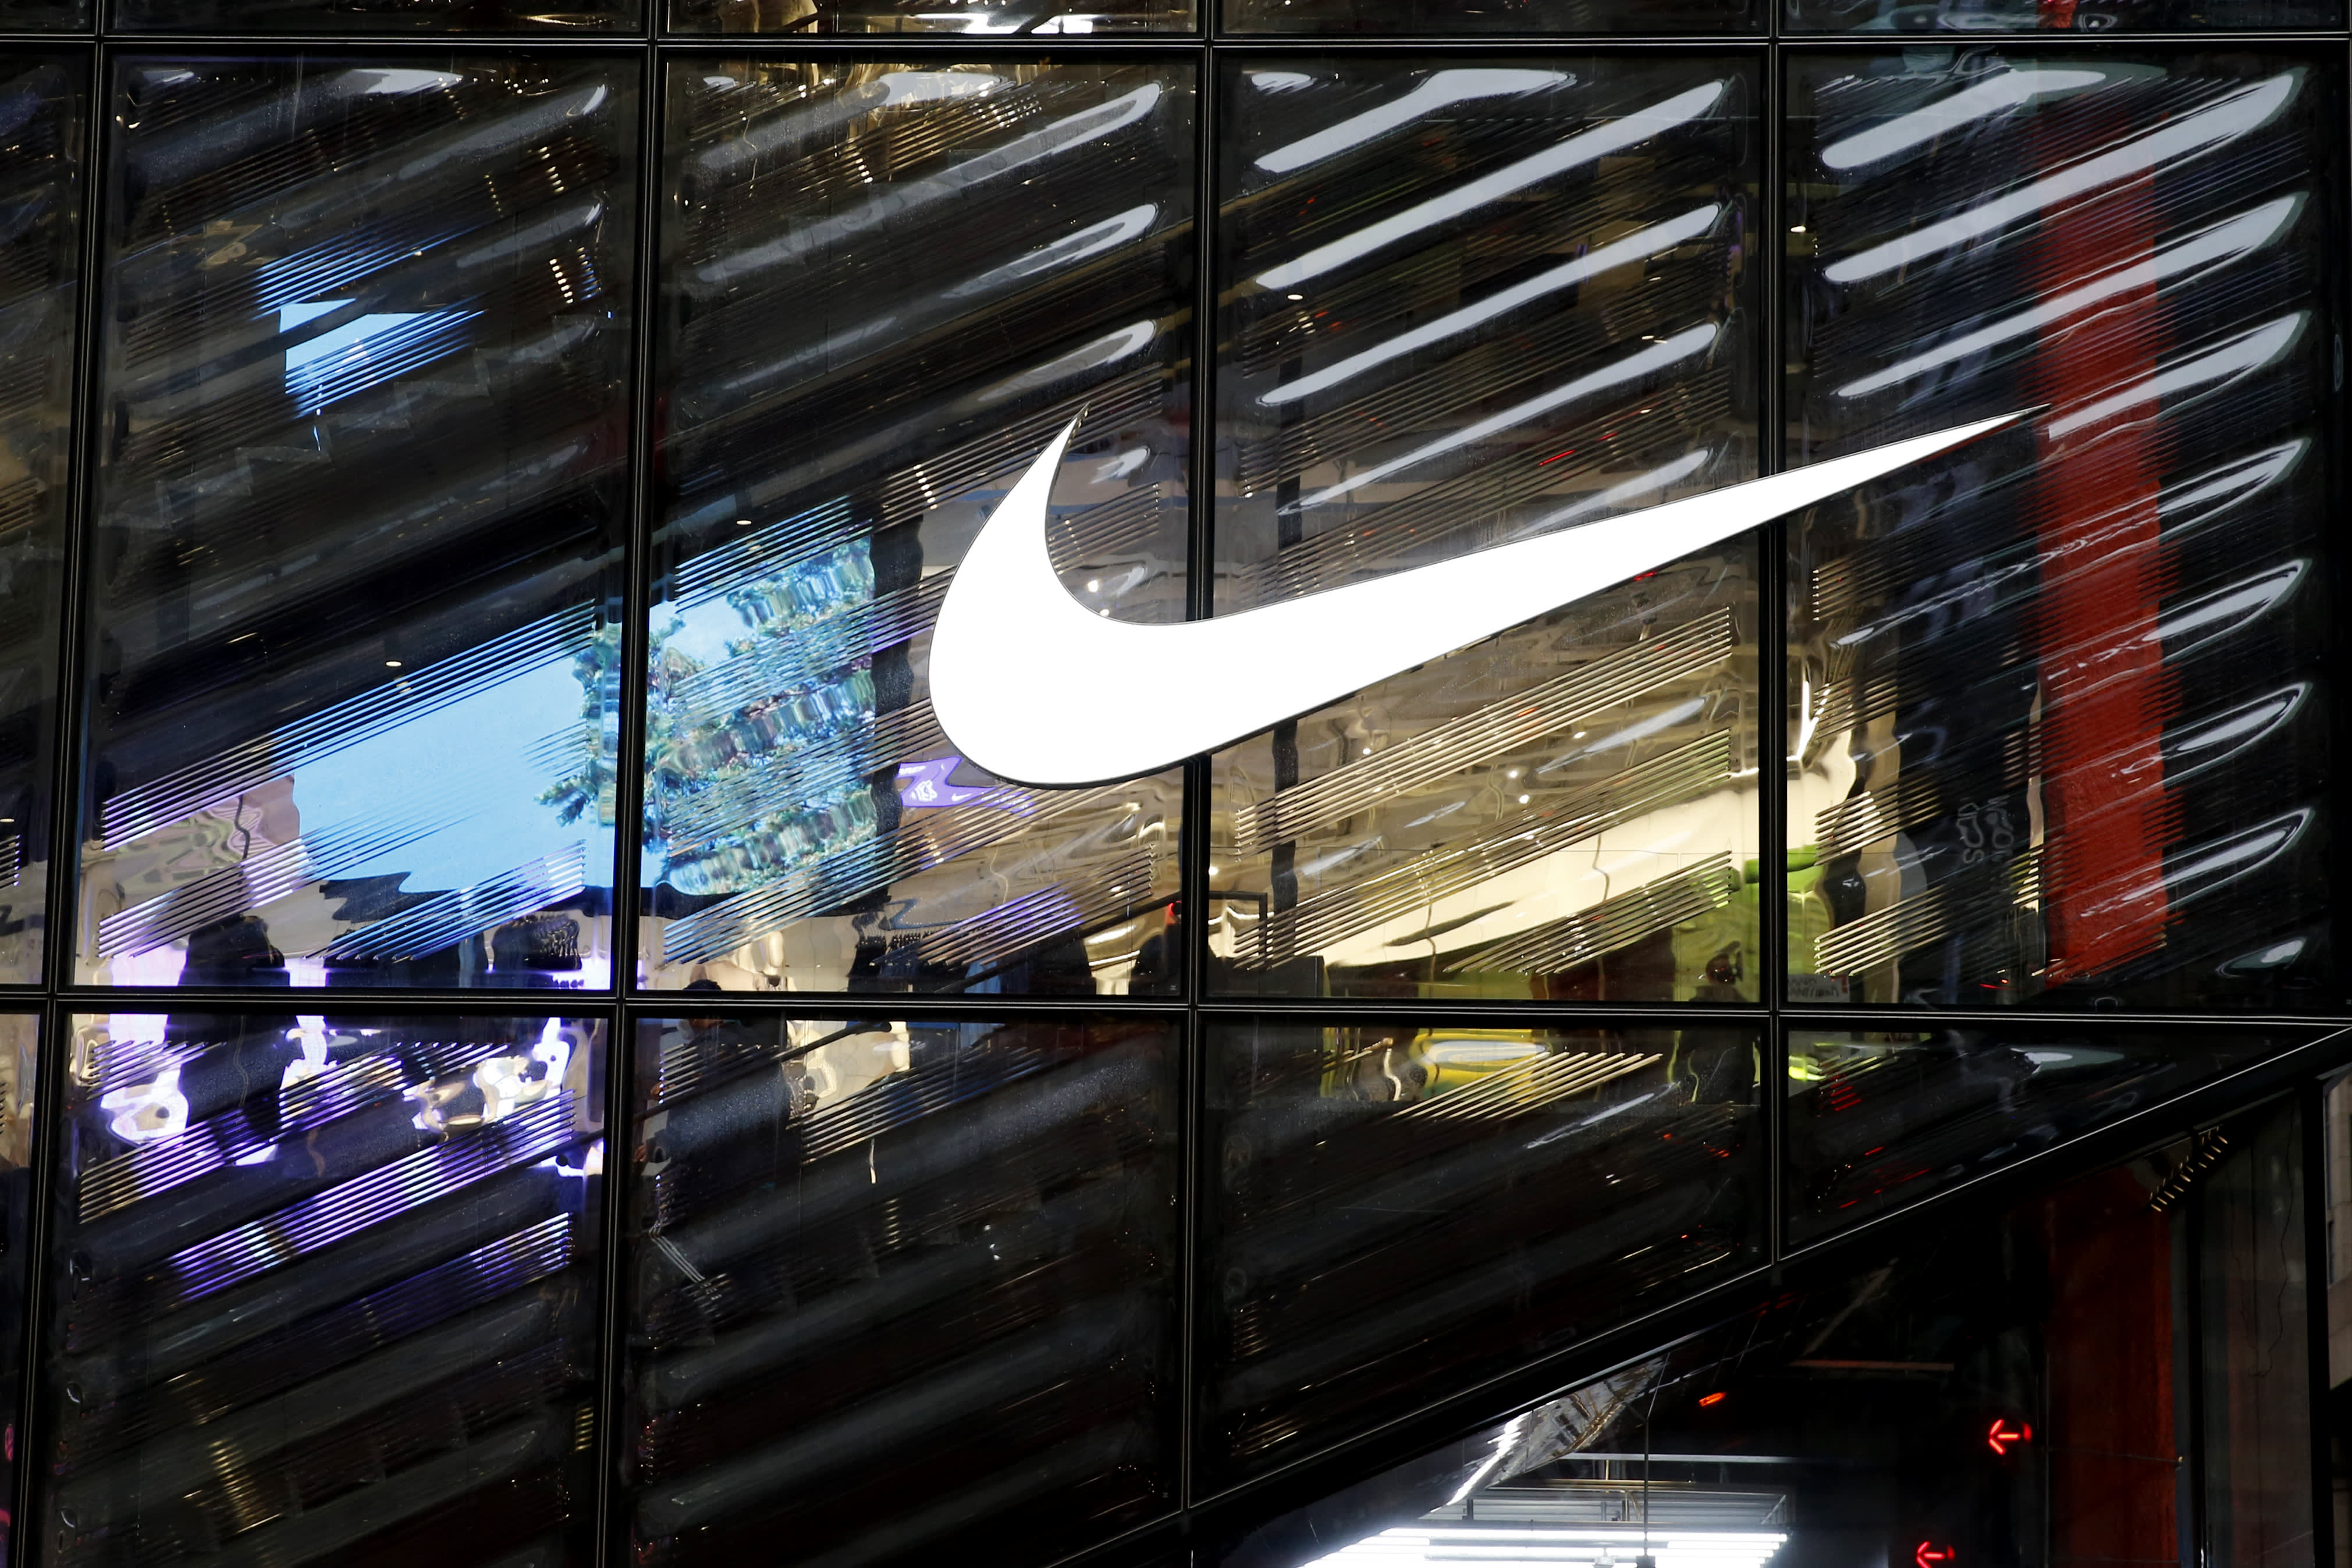 Nike sets diversity goals for 2025, links the executive team to them